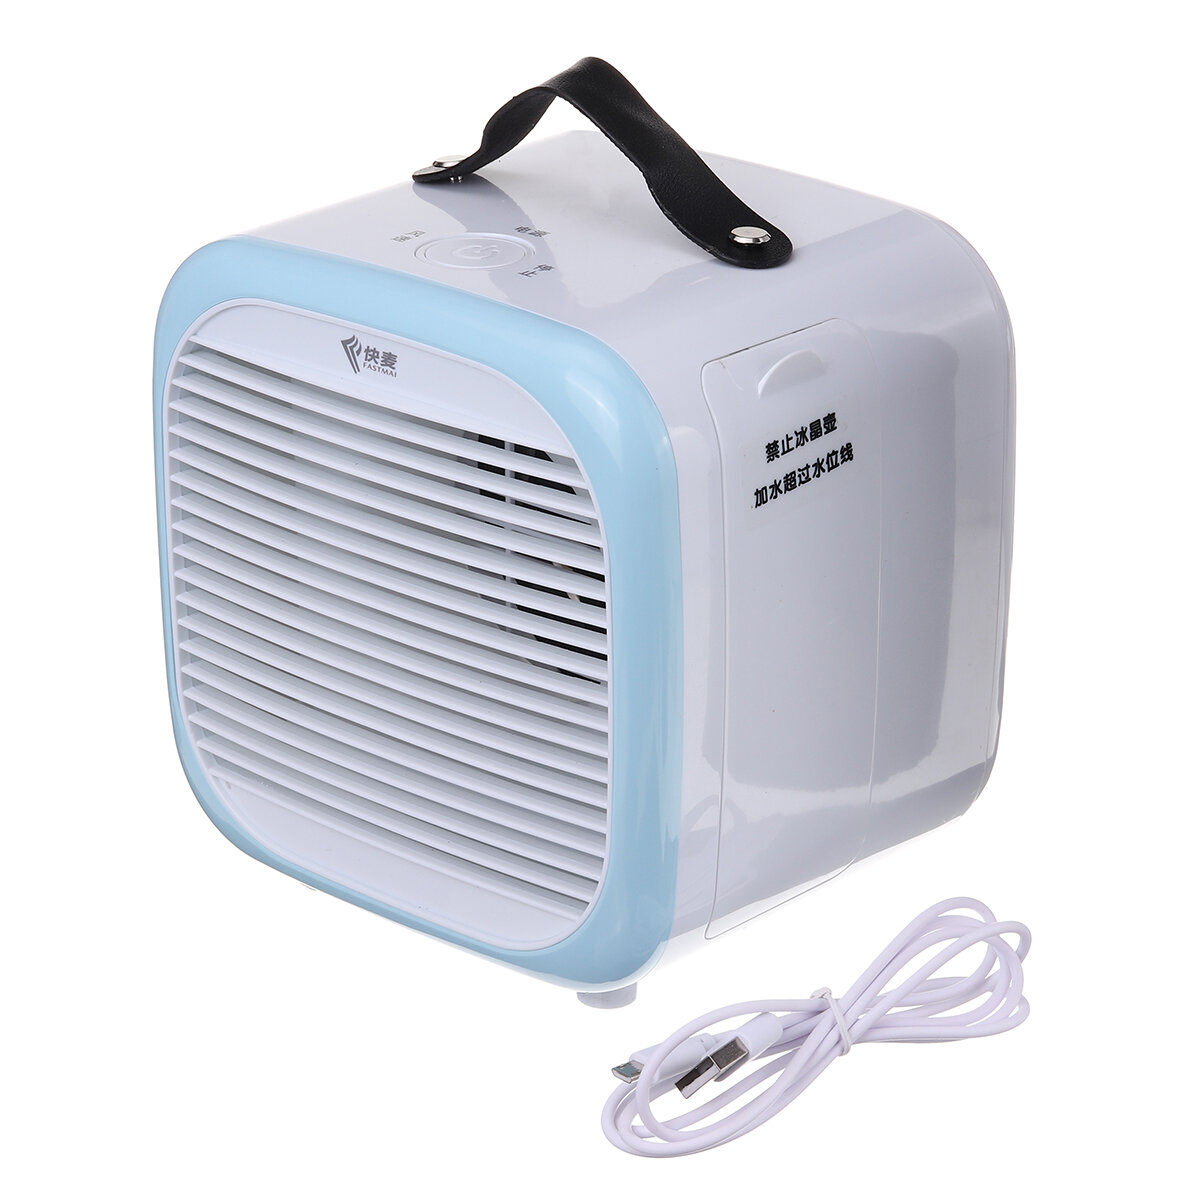 

Portable Tabletop Cooler Fan Home 2 Speeds USB Mini Atomization Air Conditioner